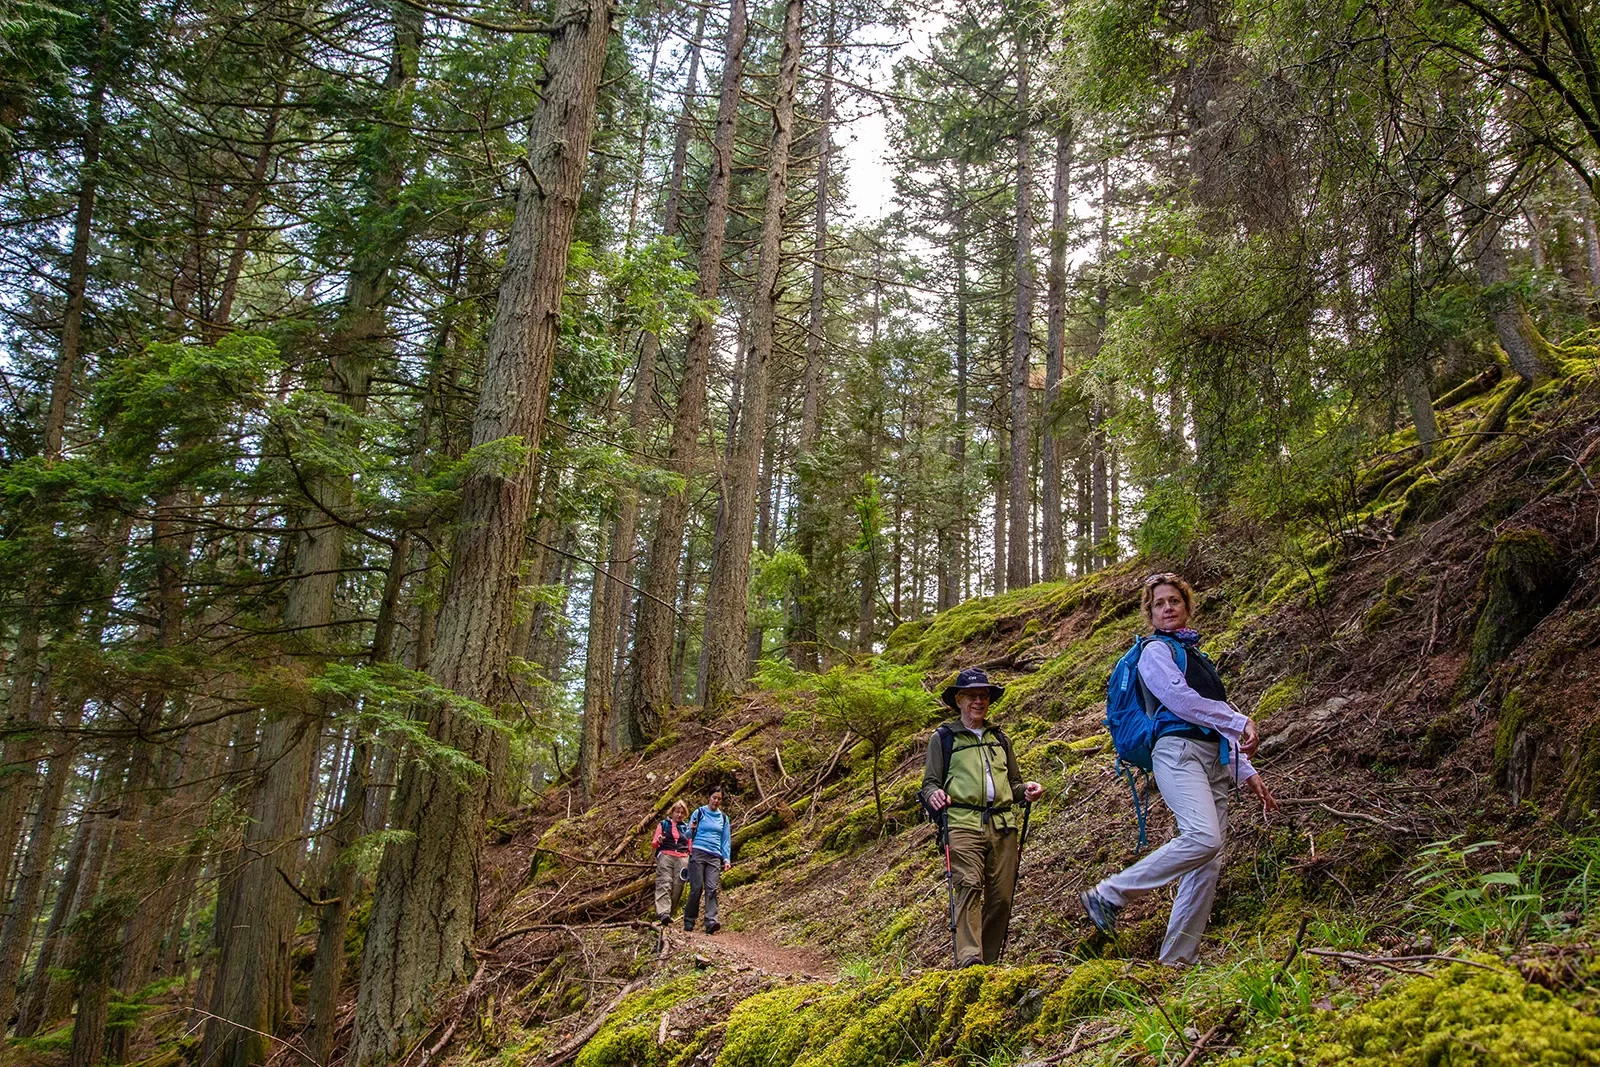 Hikers on a hill trail among tall trees